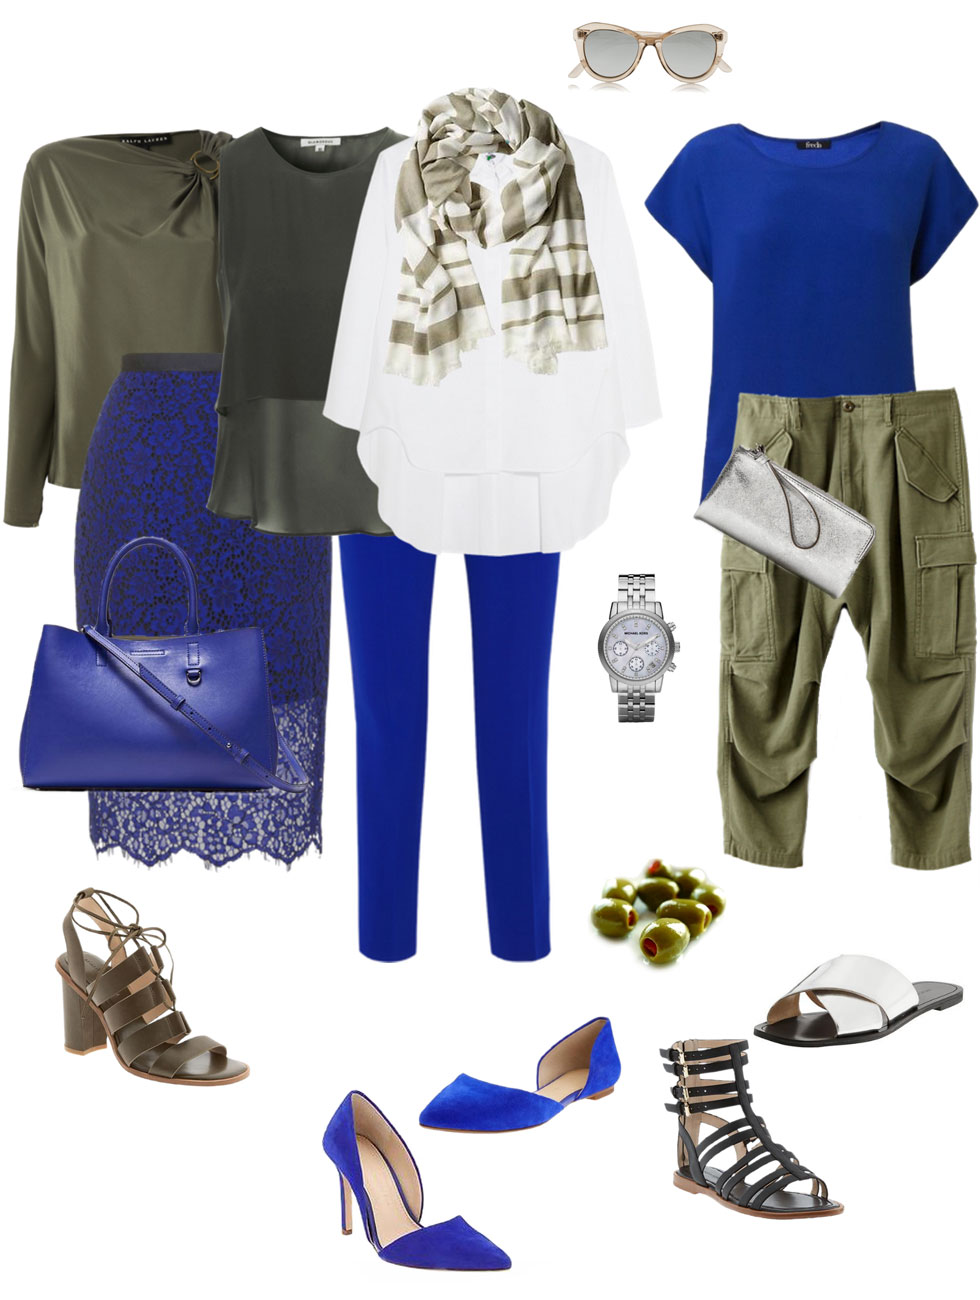 Ensemble Style Advice - Cobalt and Olive